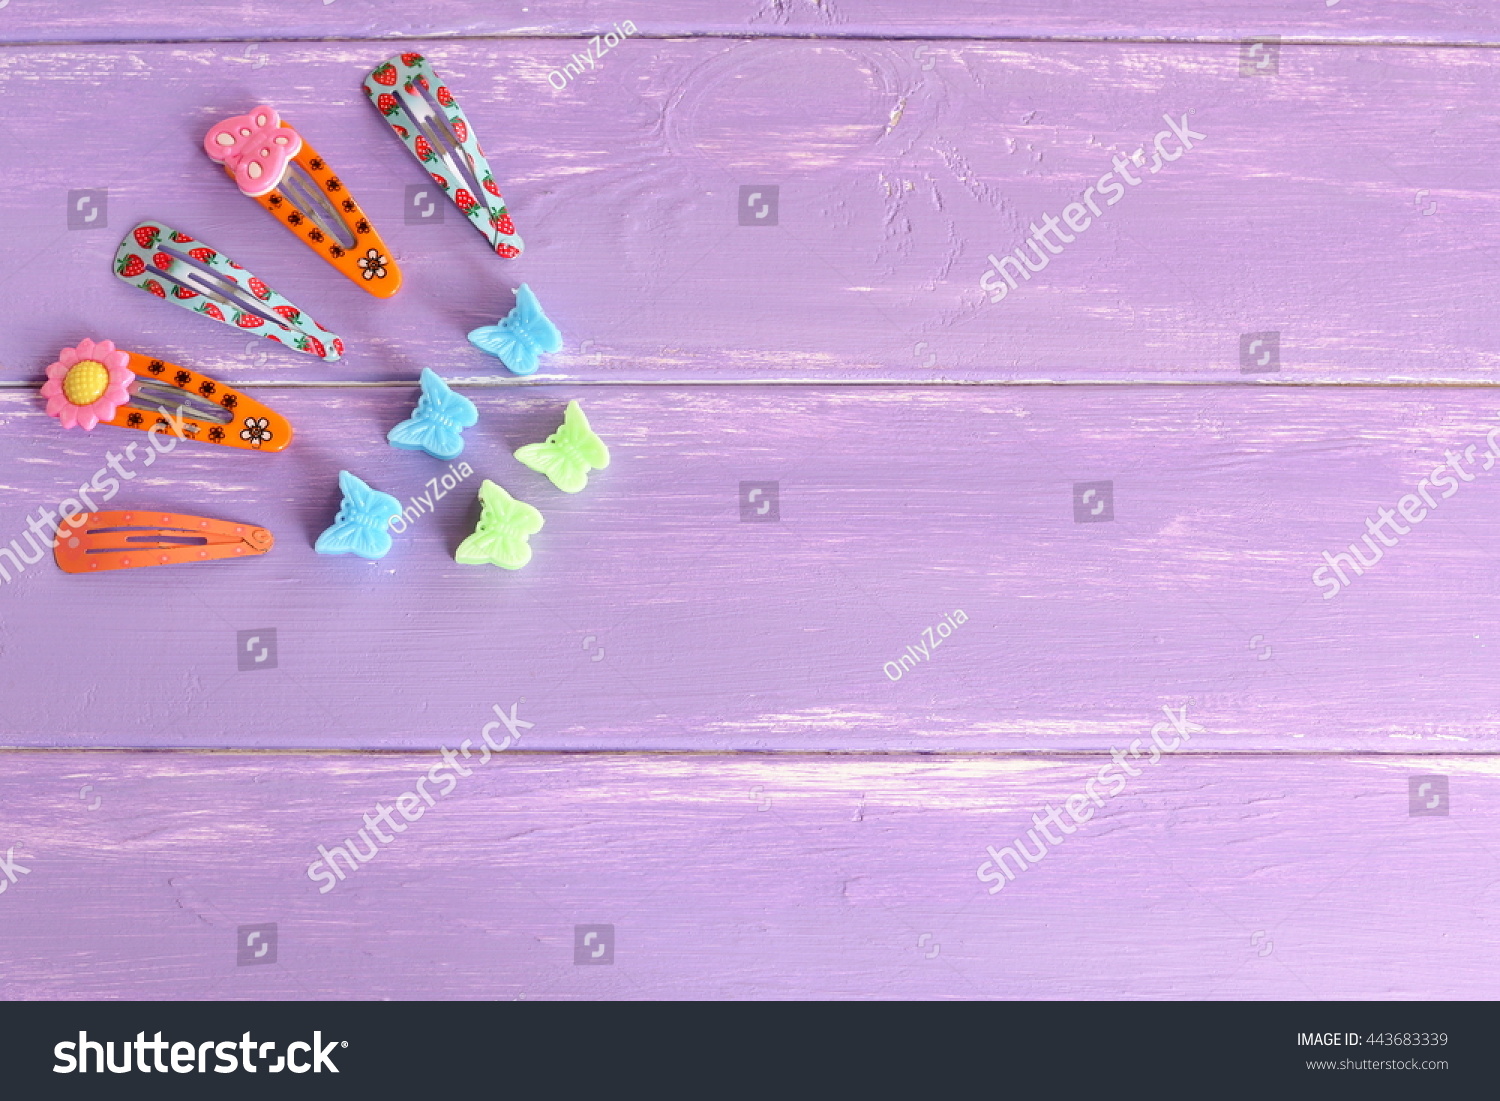 Bright colored hair clips for girls on lilac wooden background with copy space for text. Set of colorful hair clips. Girl fashion background  #443683339